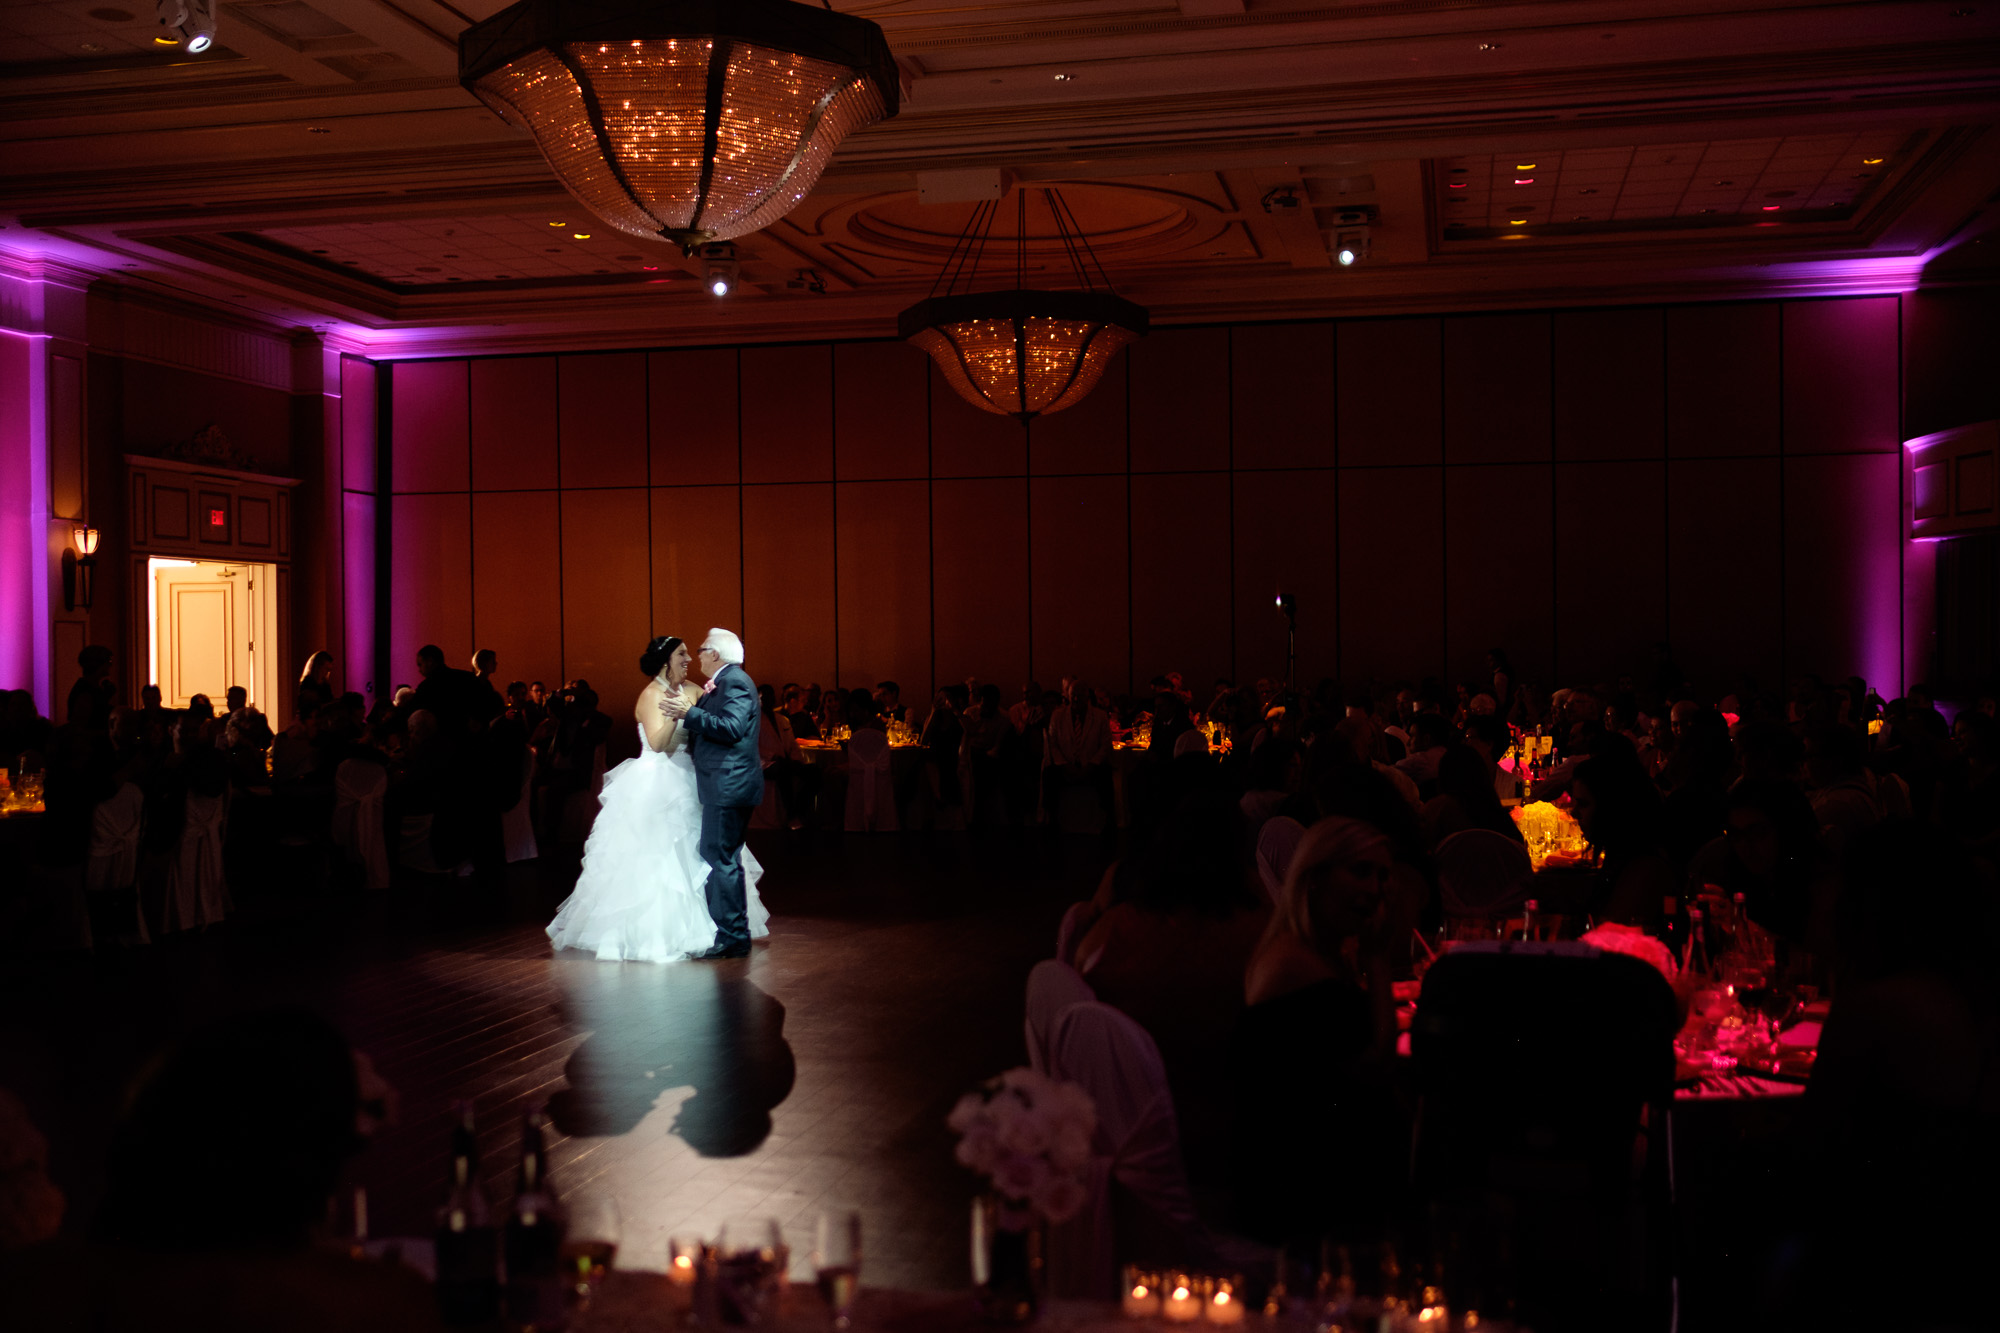  Melanie and her father share a dance during the wedding reception at the Toscana hall in Toronto.&nbsp; 